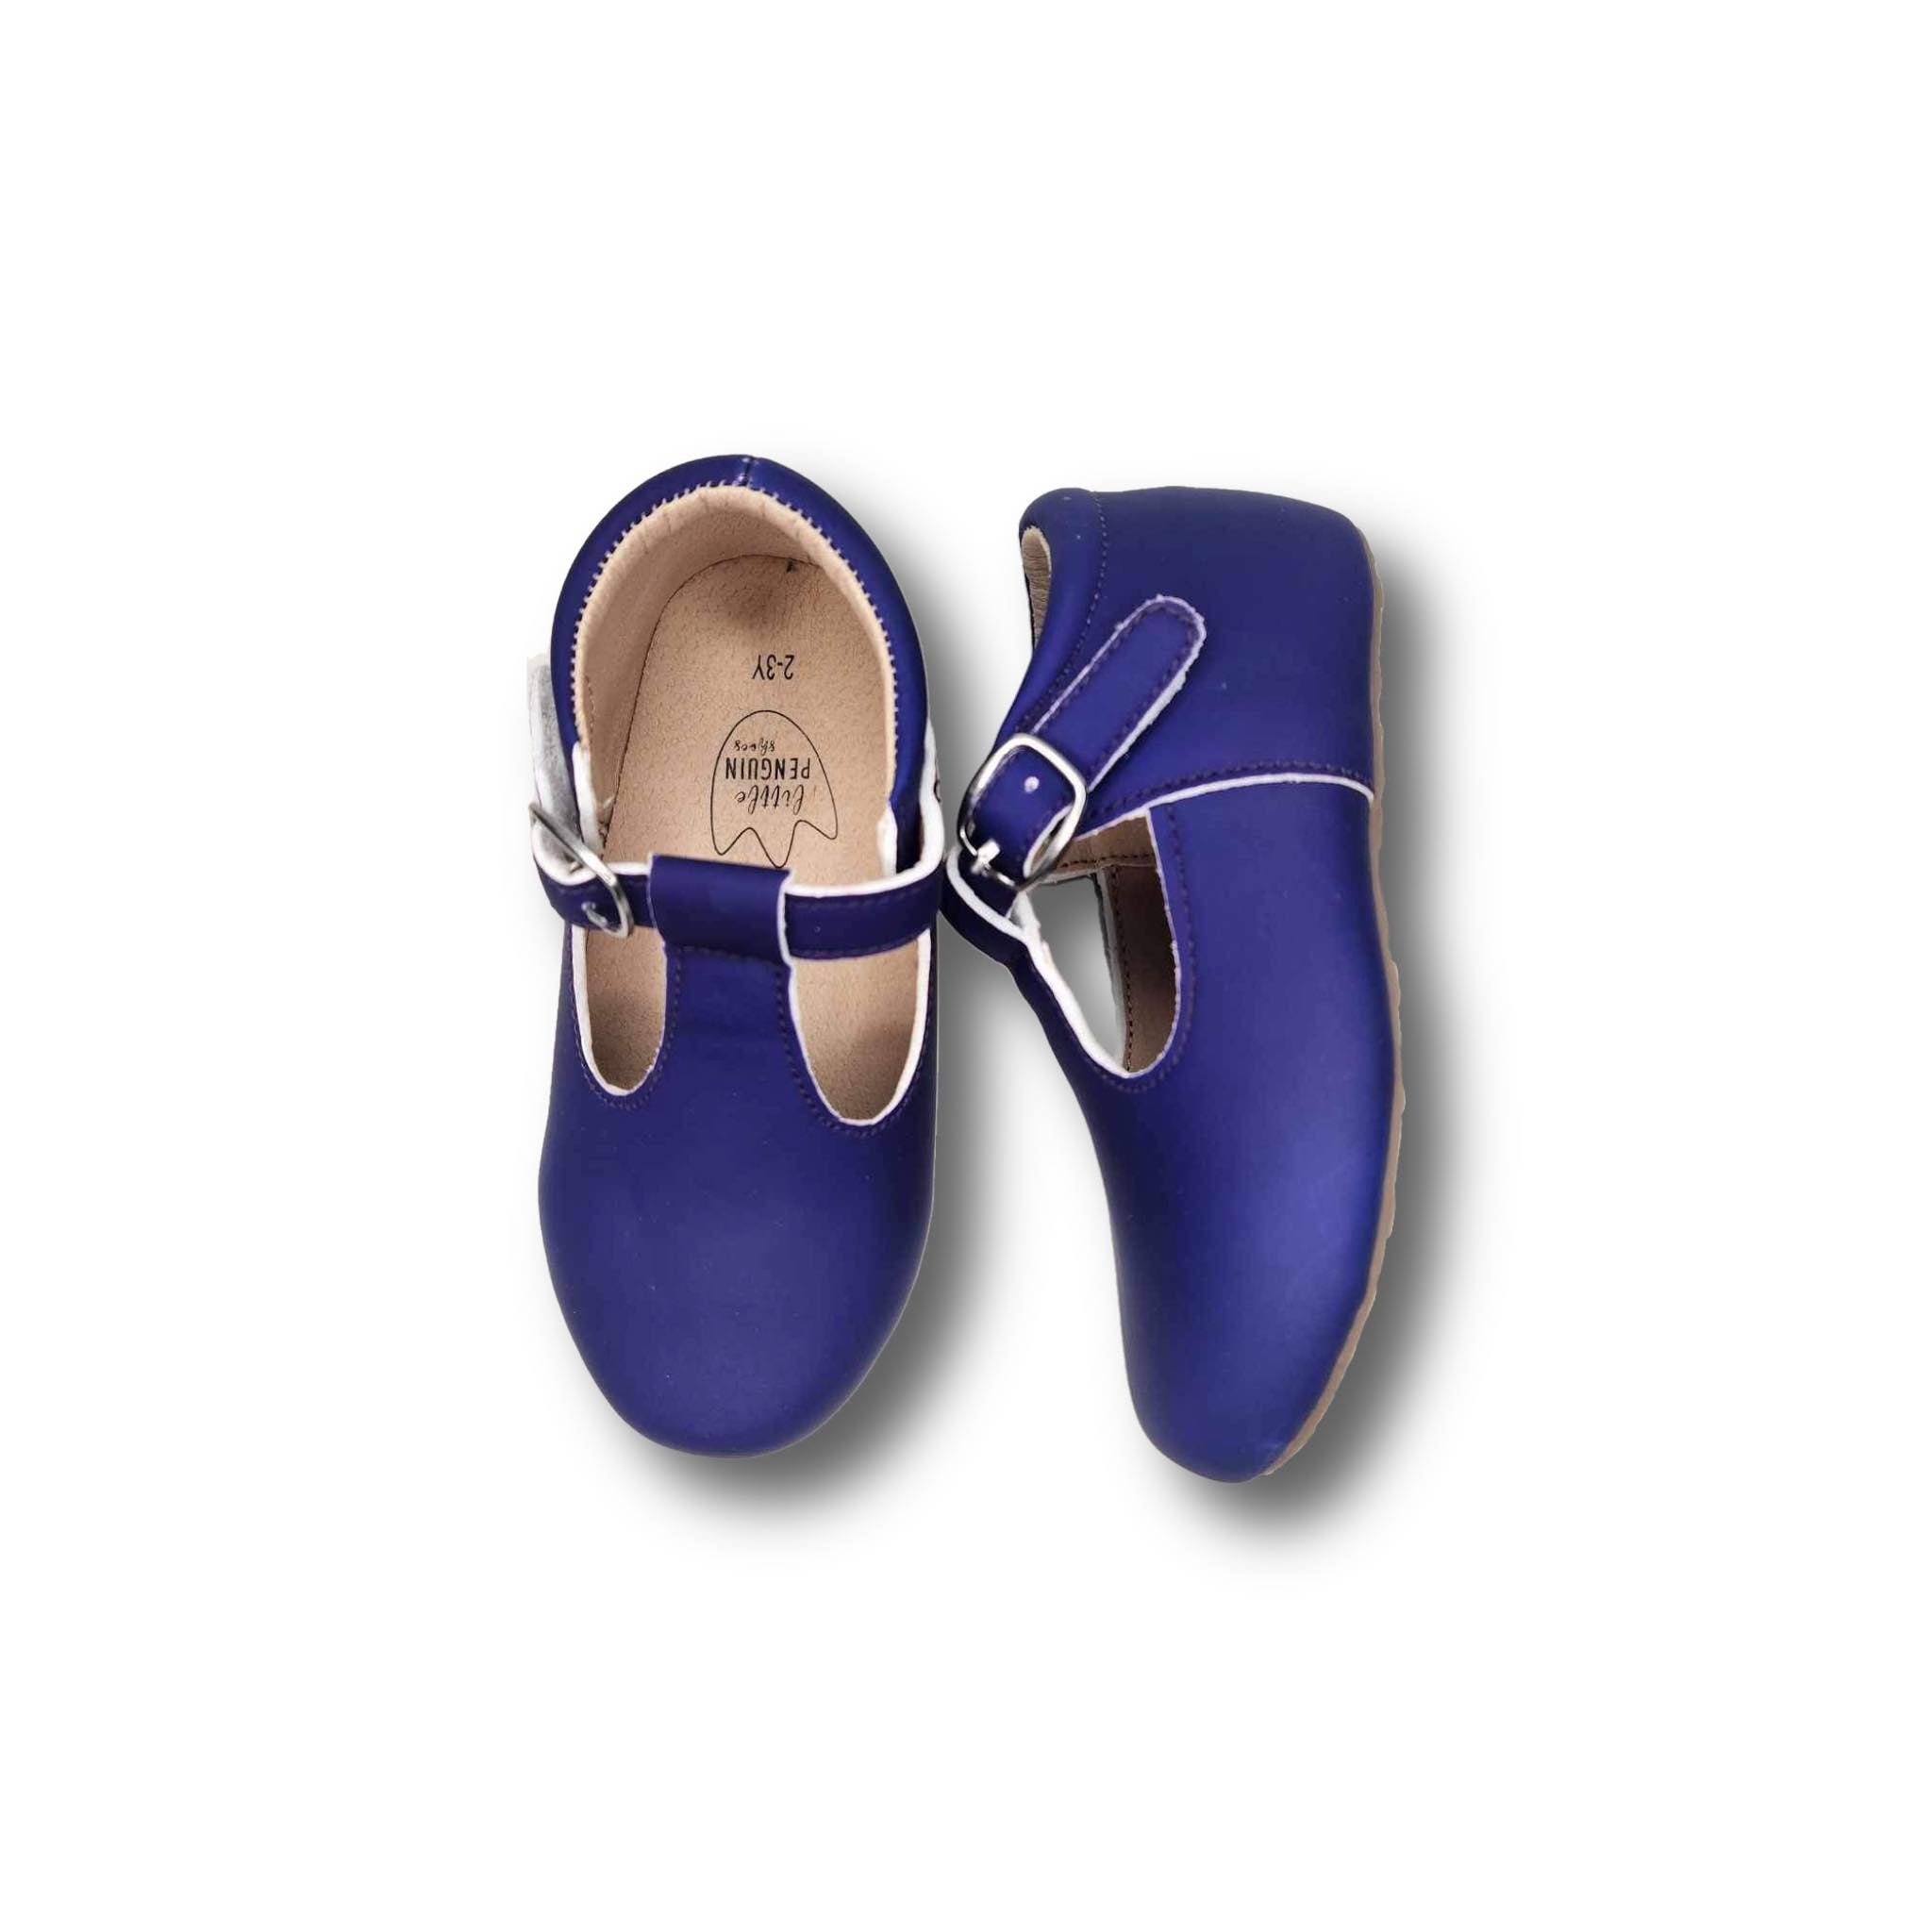 AUBREIGH Children's T-Strap Shoe in Color Changing Purple and Pink